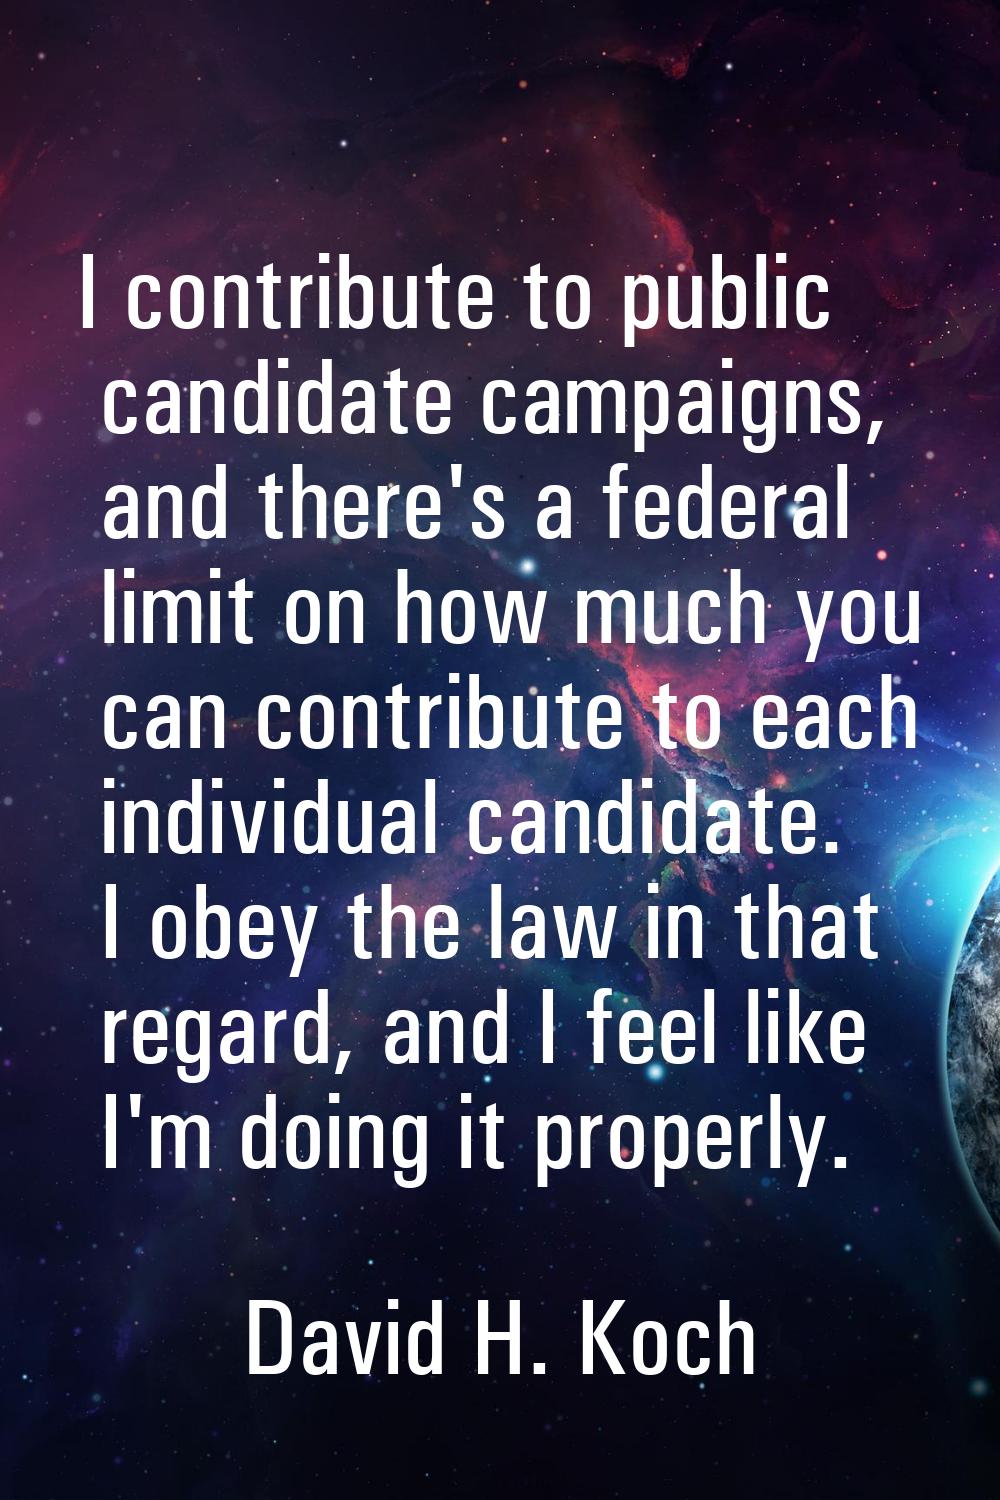 I contribute to public candidate campaigns, and there's a federal limit on how much you can contrib